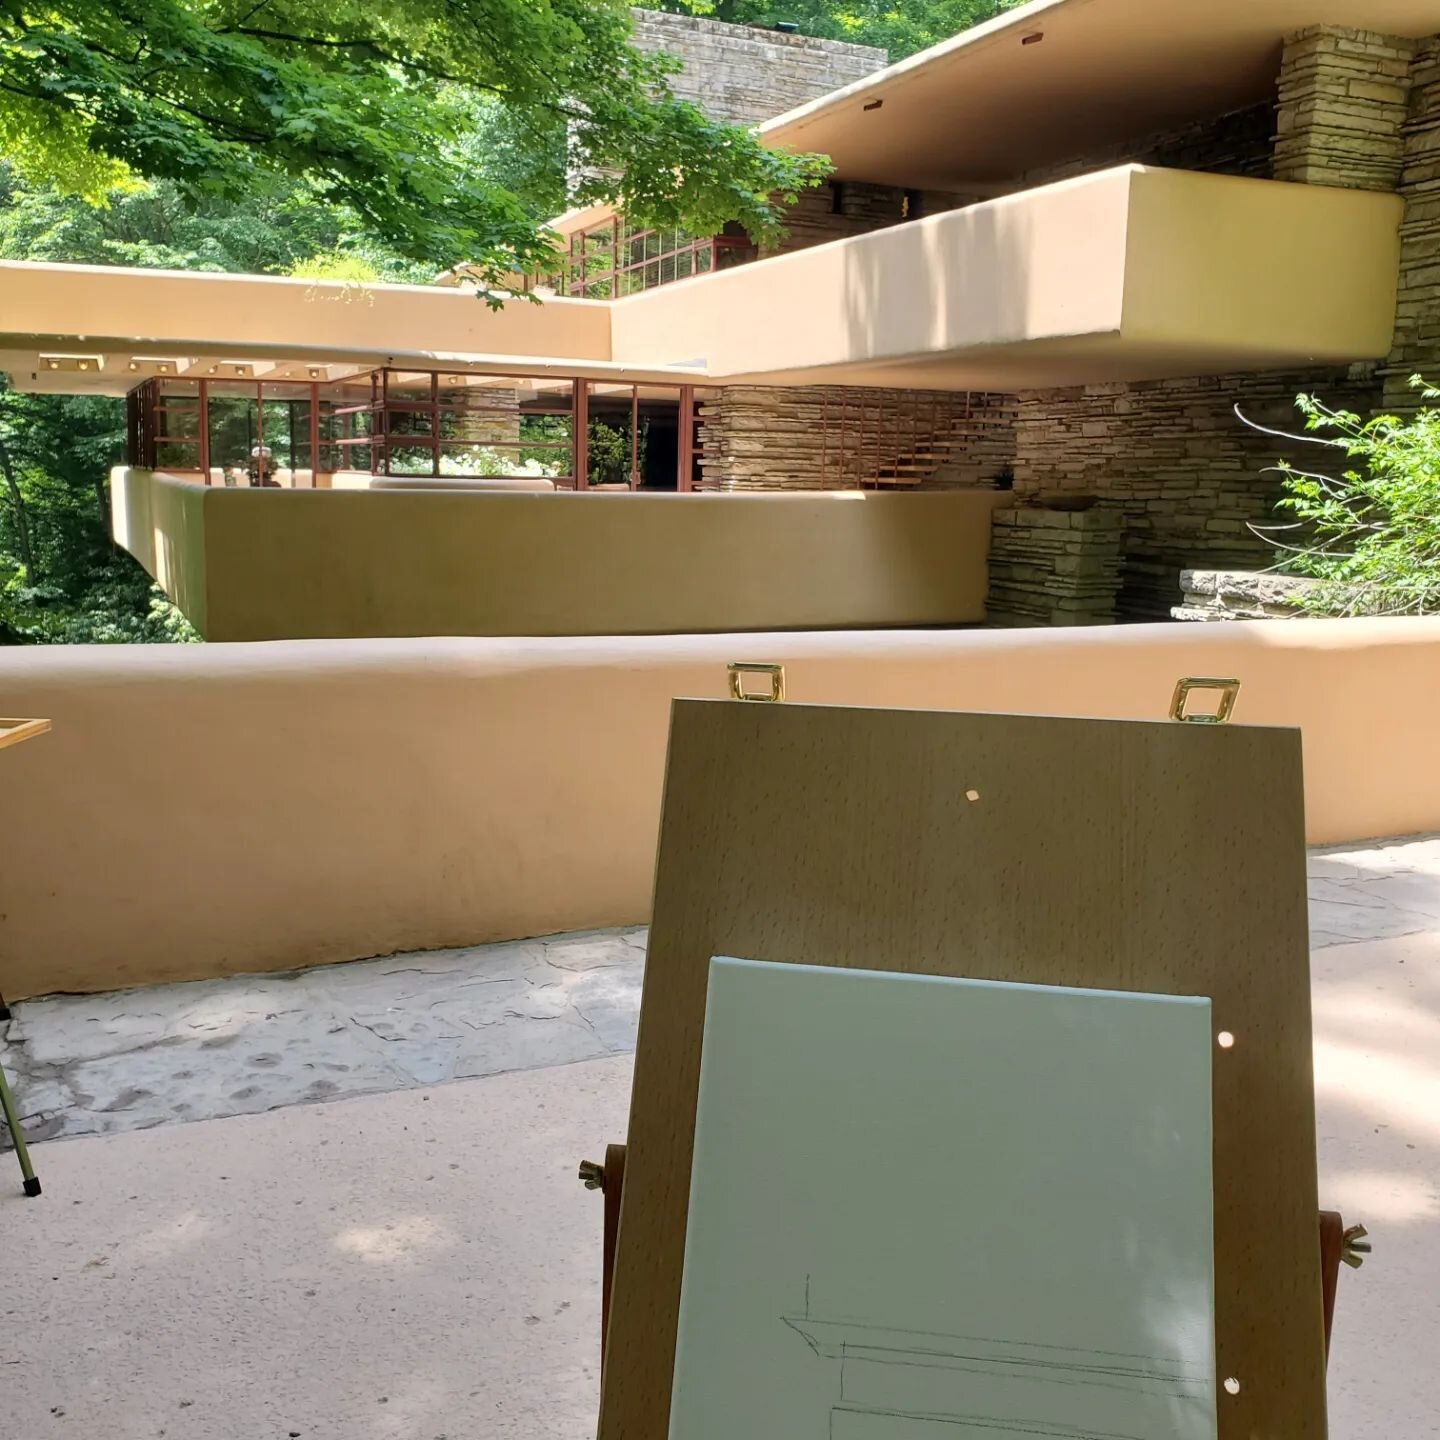 Some shots of Fallingwater from an &quot;en plein air&quot; paint workshop I attended in June. Most of the class went to the traditional view down the creek where you see the house and falls but I like this view also. Best part was FW is closed on We